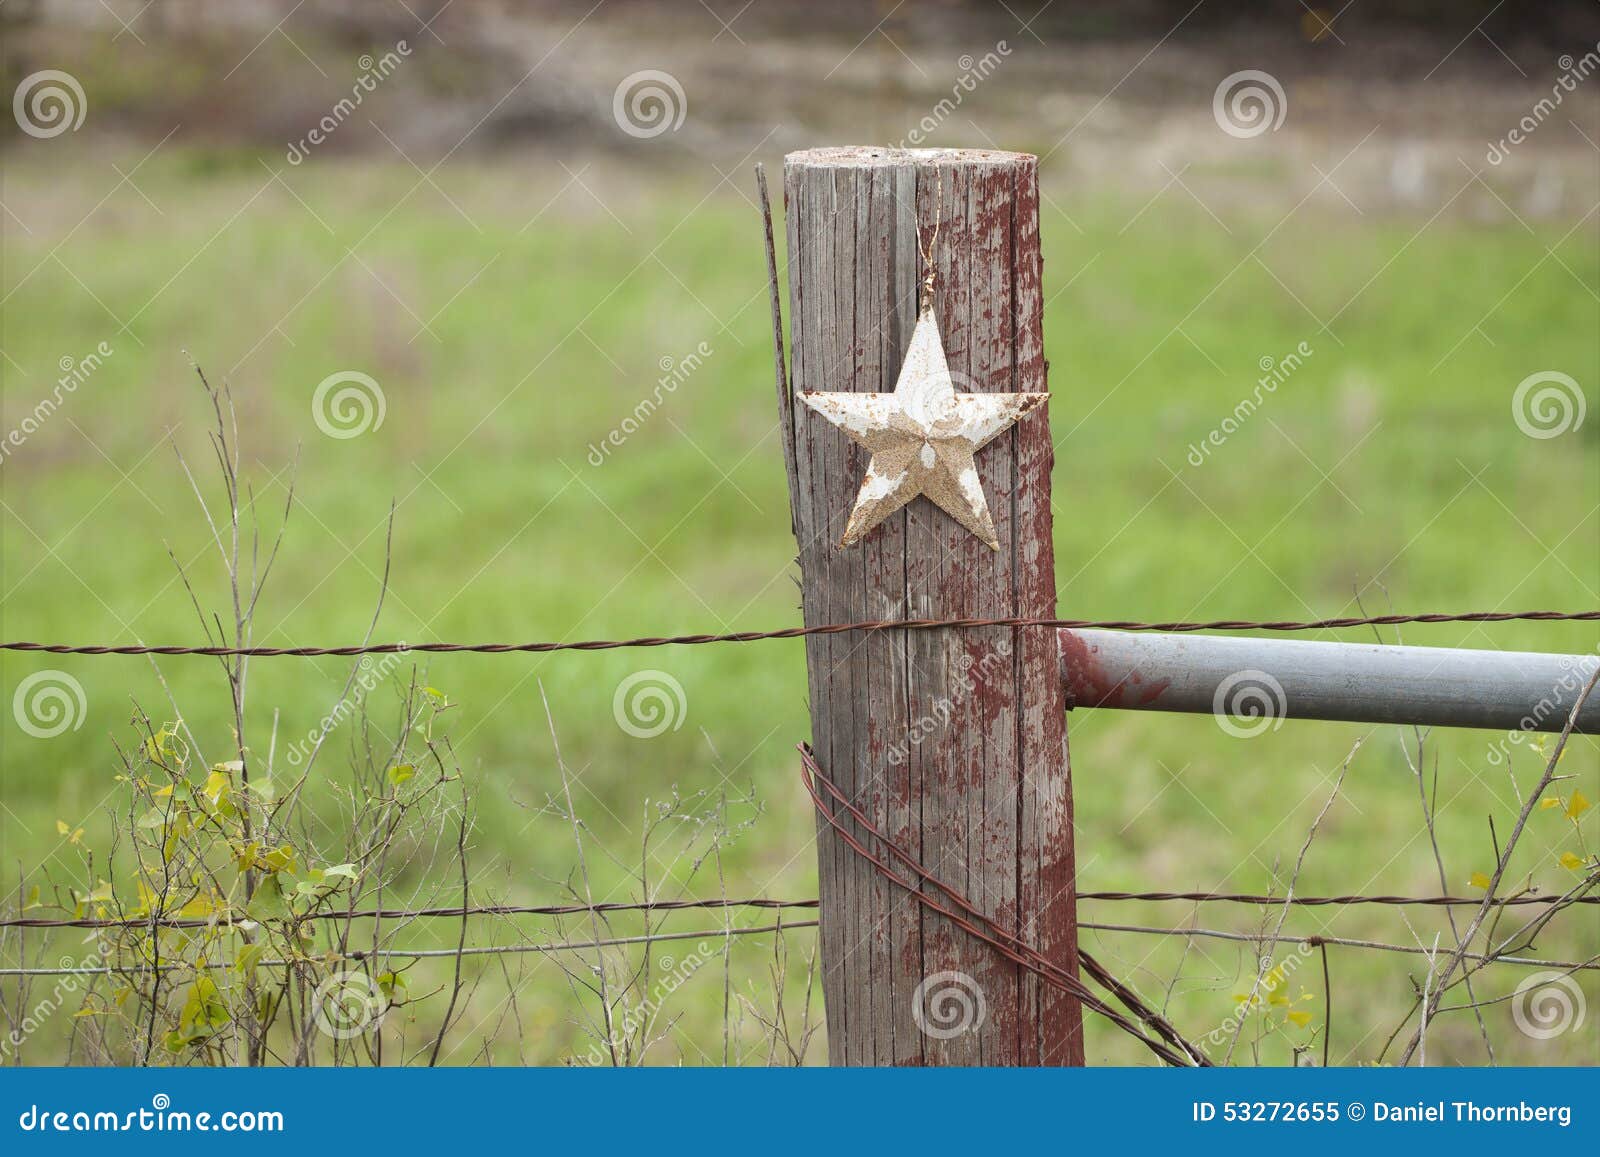 selective focus view of grungy star on old fence post in texas